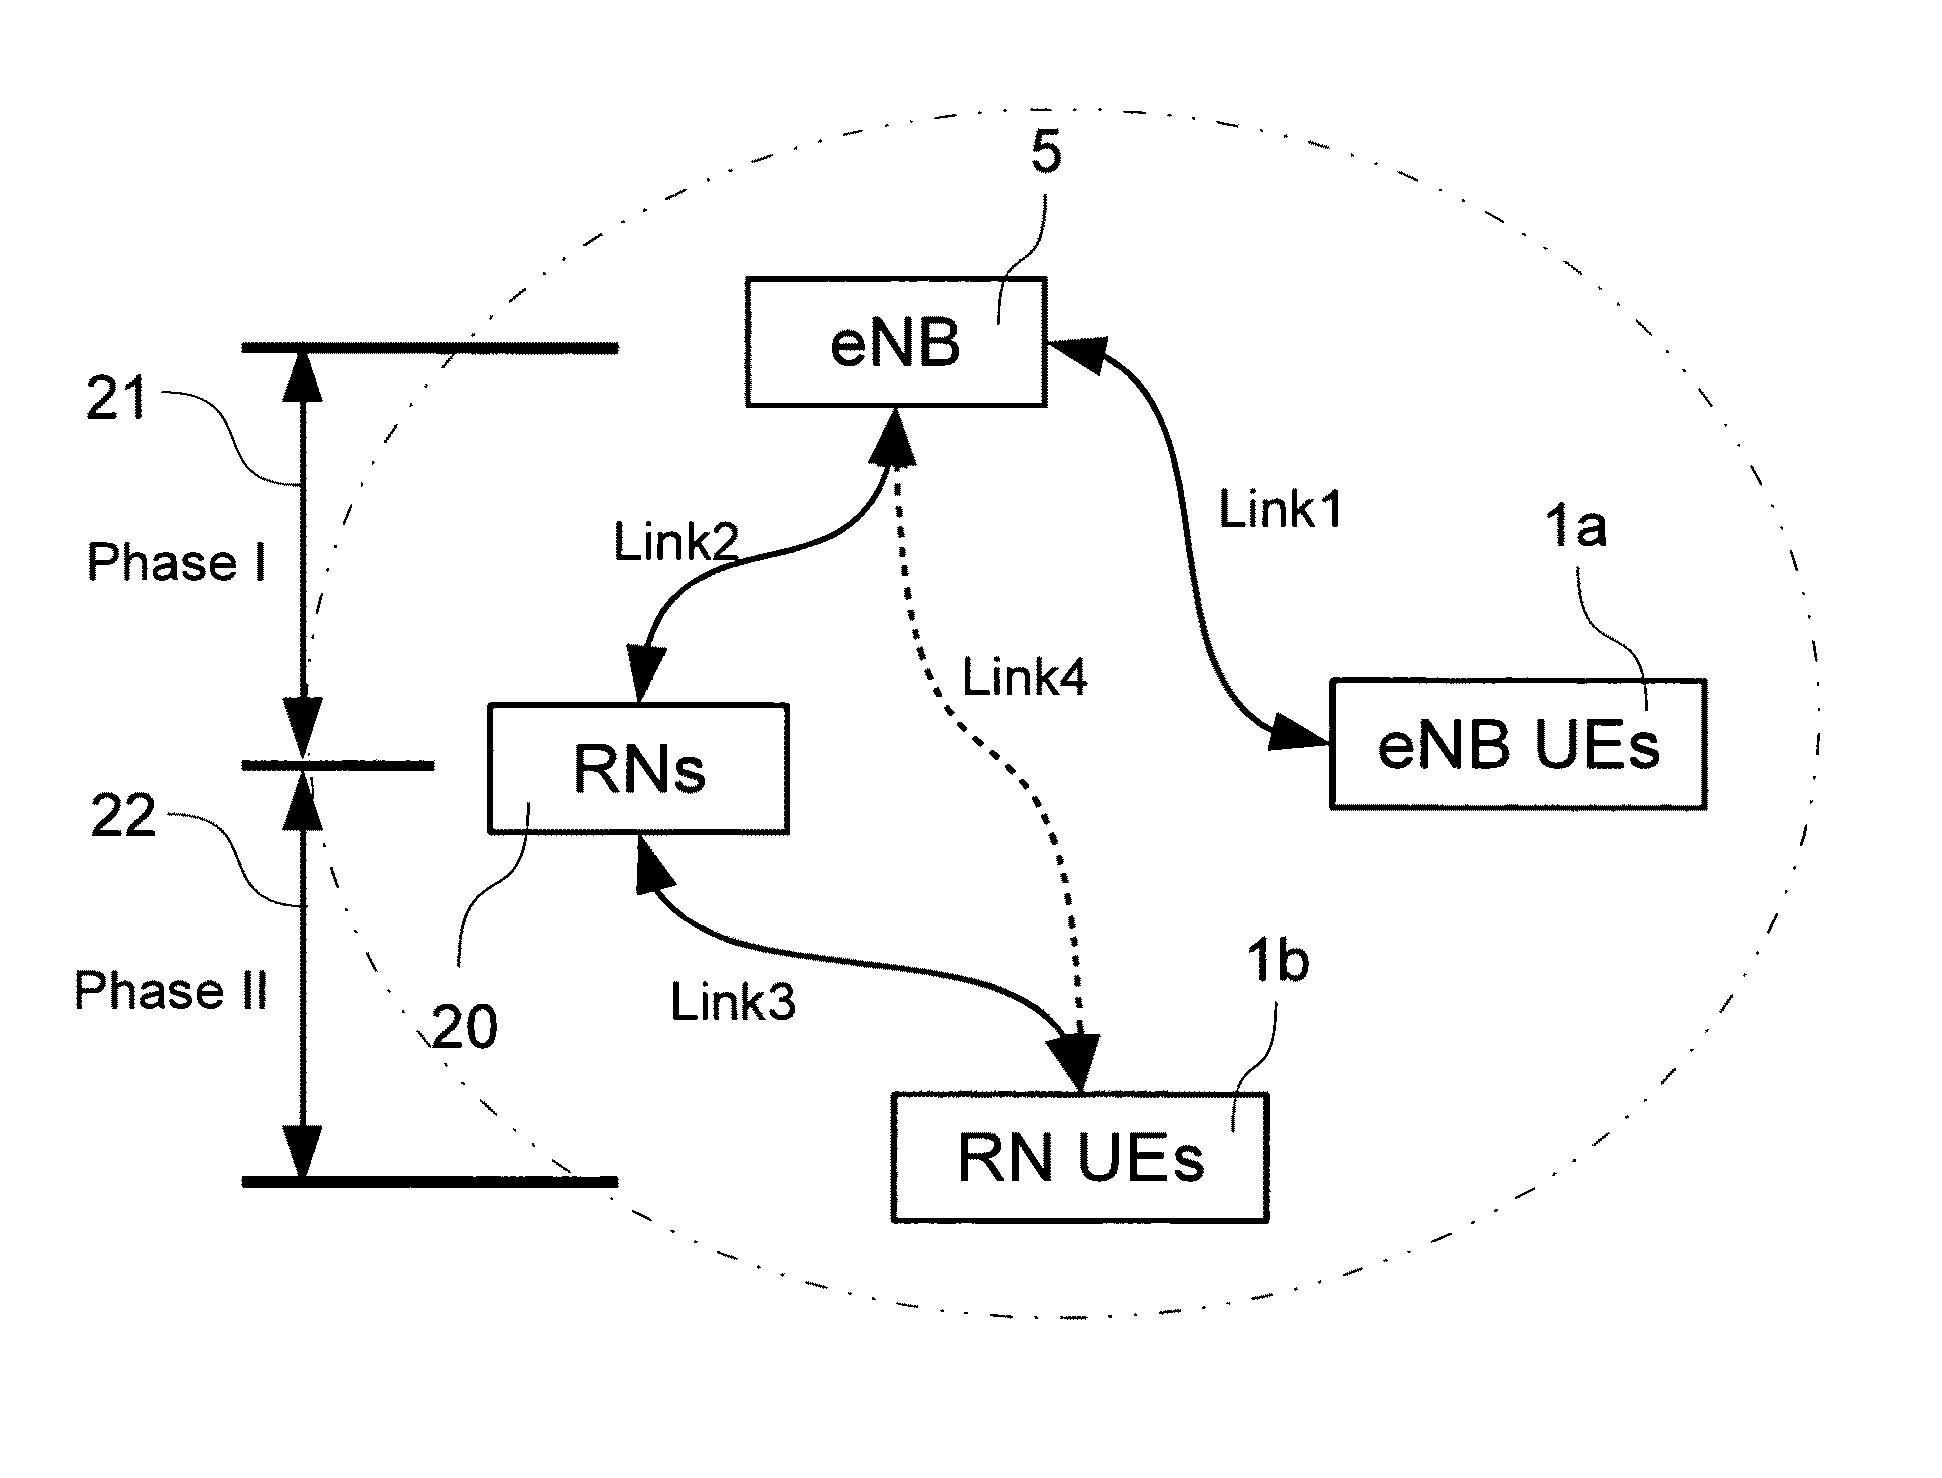 Relays in telecommunications networks